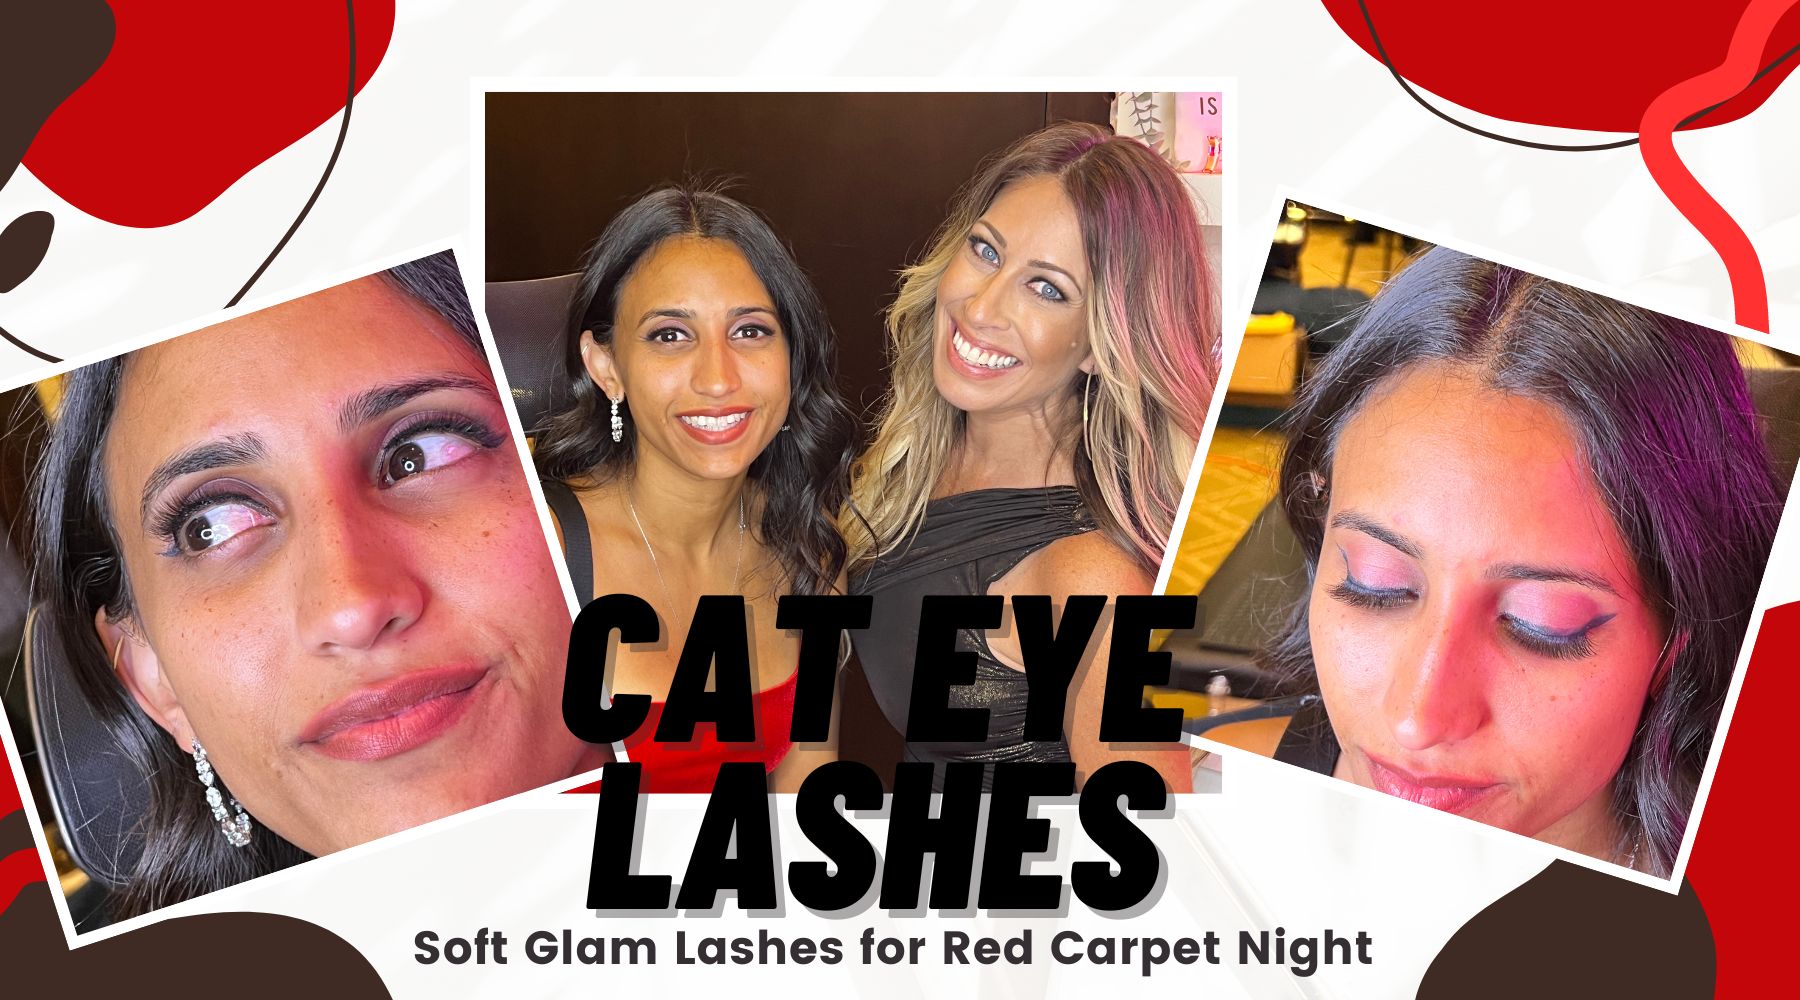 Cat Eye Lashes for a Soft Glam Look at the Orlando Salsa Congress